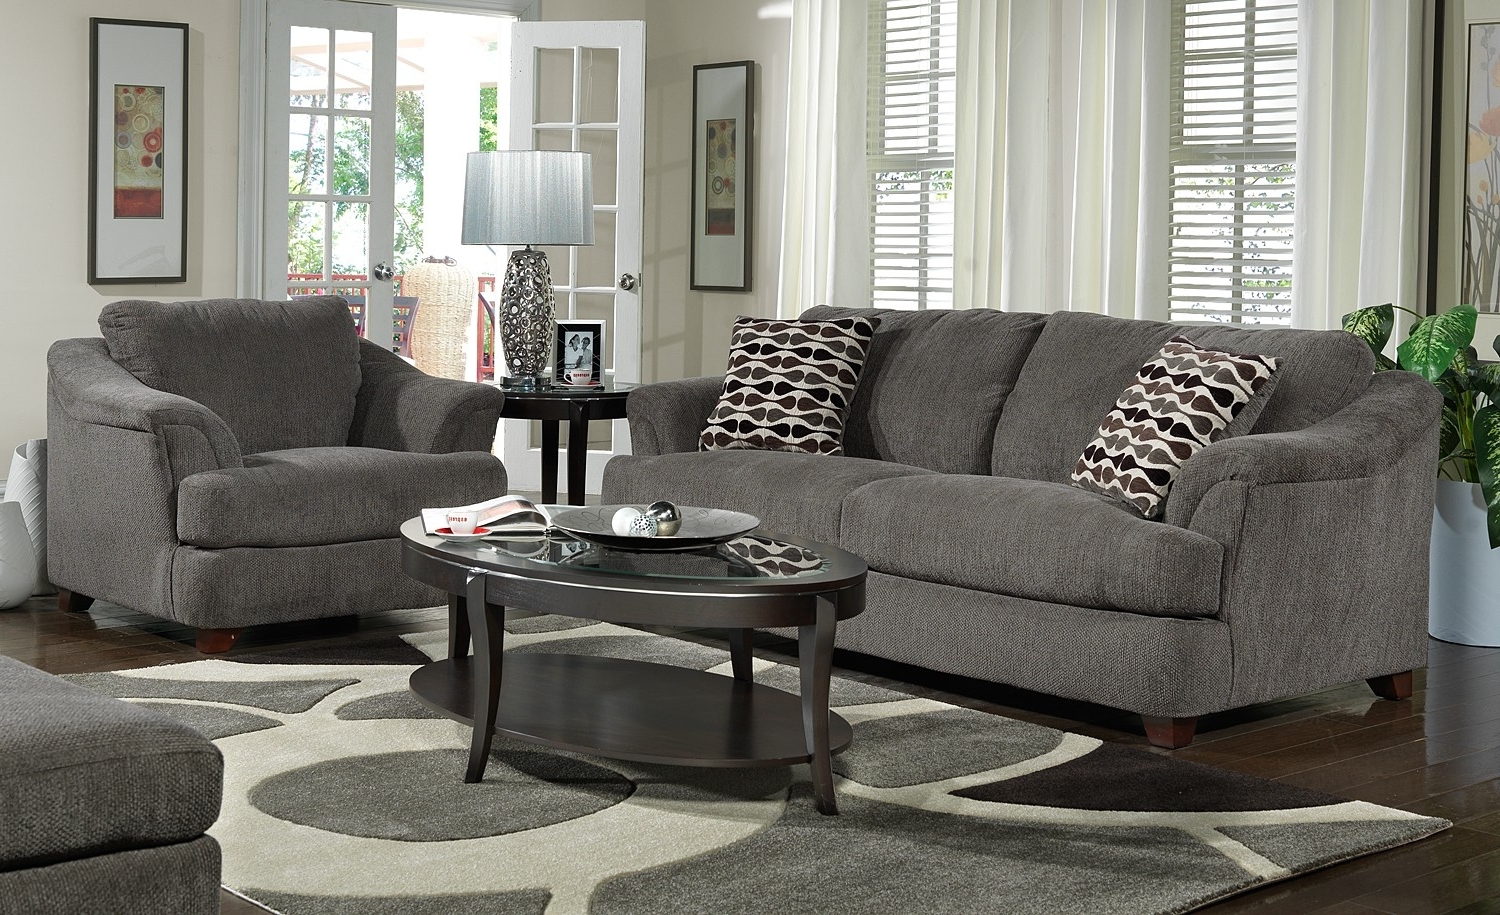 gray living room furniture gray living room furniture simply innovative gray 58 with 1500 × 915 TQZBPTW